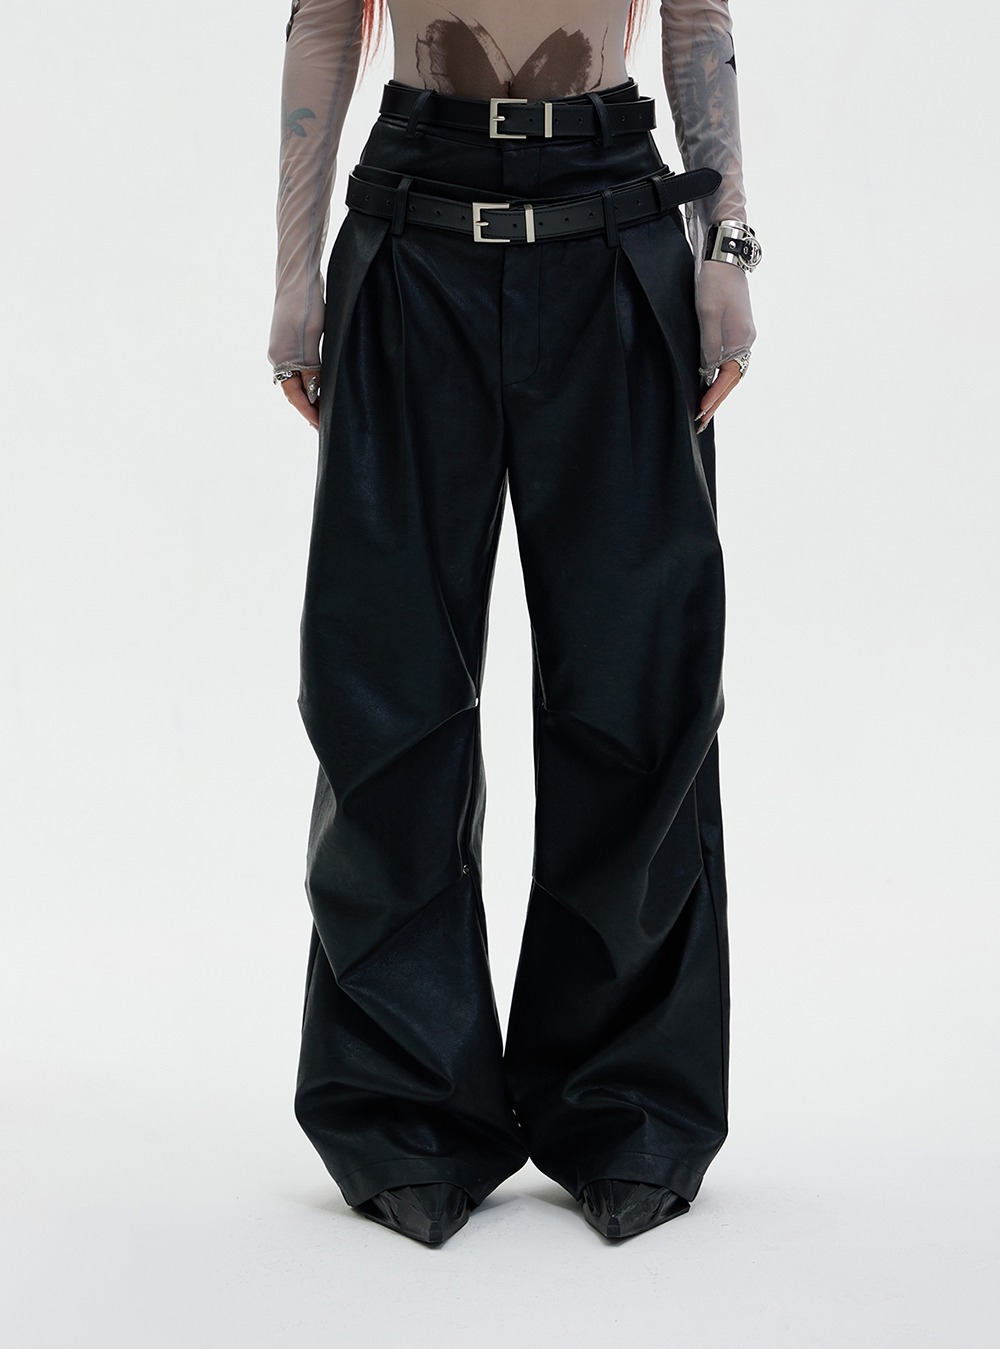 [PEOPLESTYLE] 3D Wrinkle Leather Pants